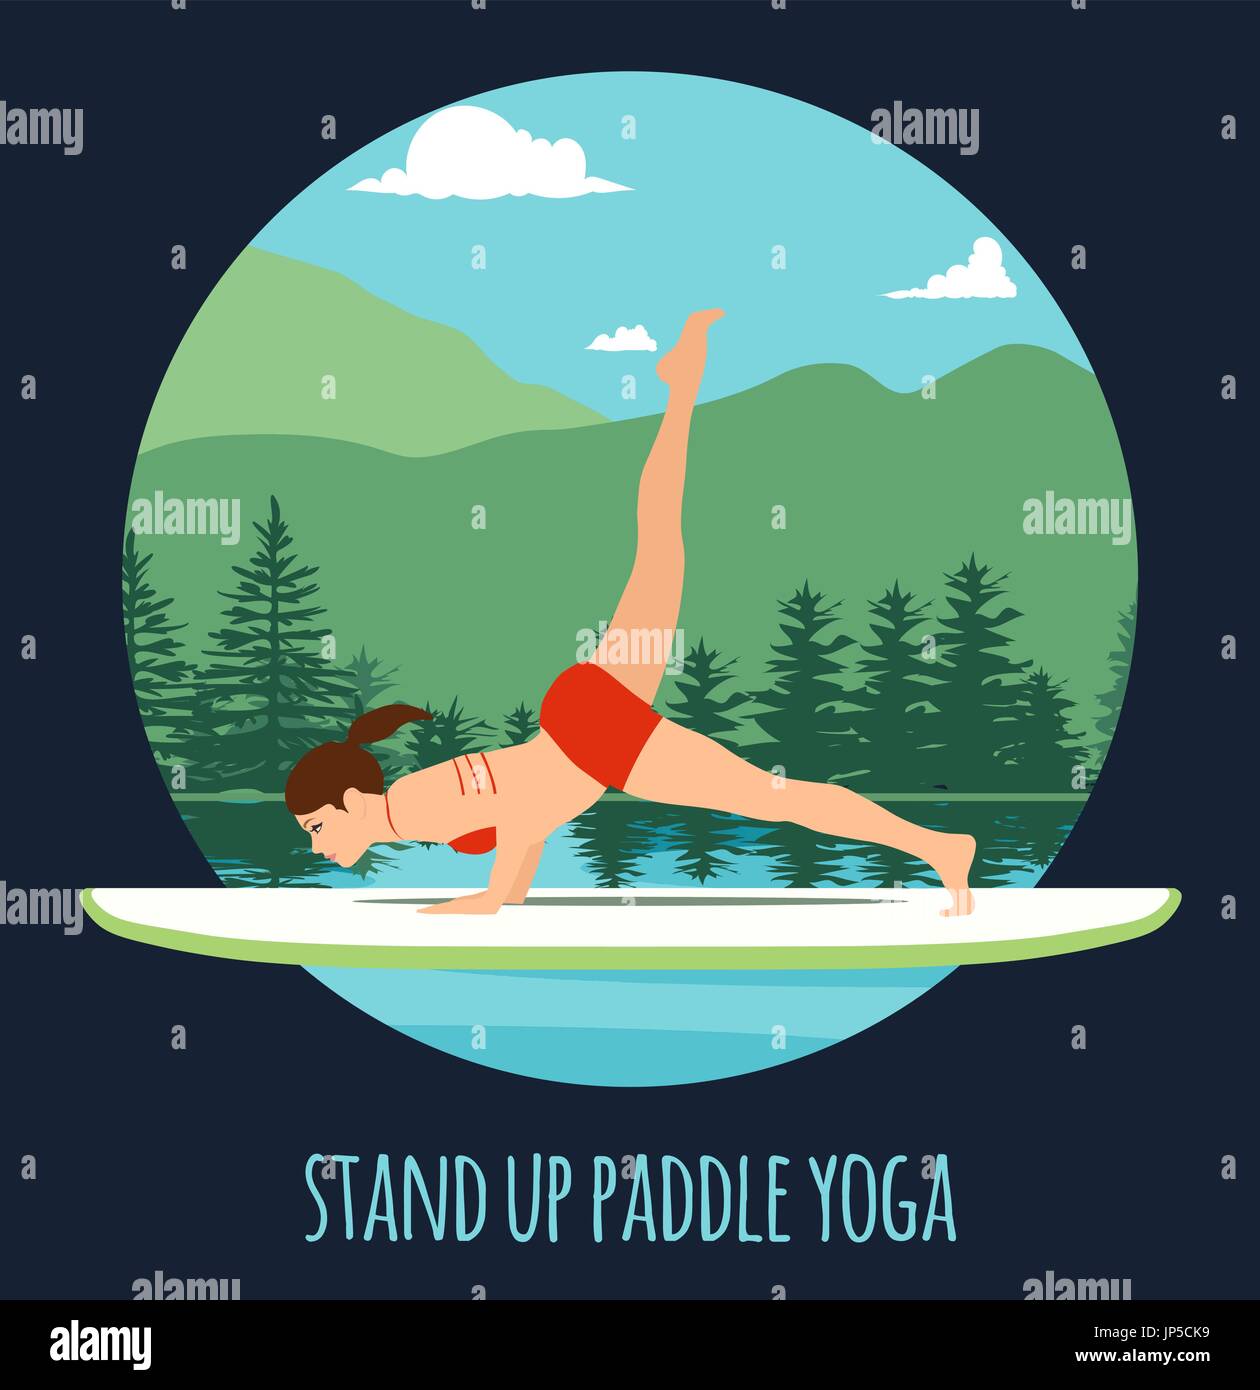 Yoga on paddle board Stock Vector Images - Alamy